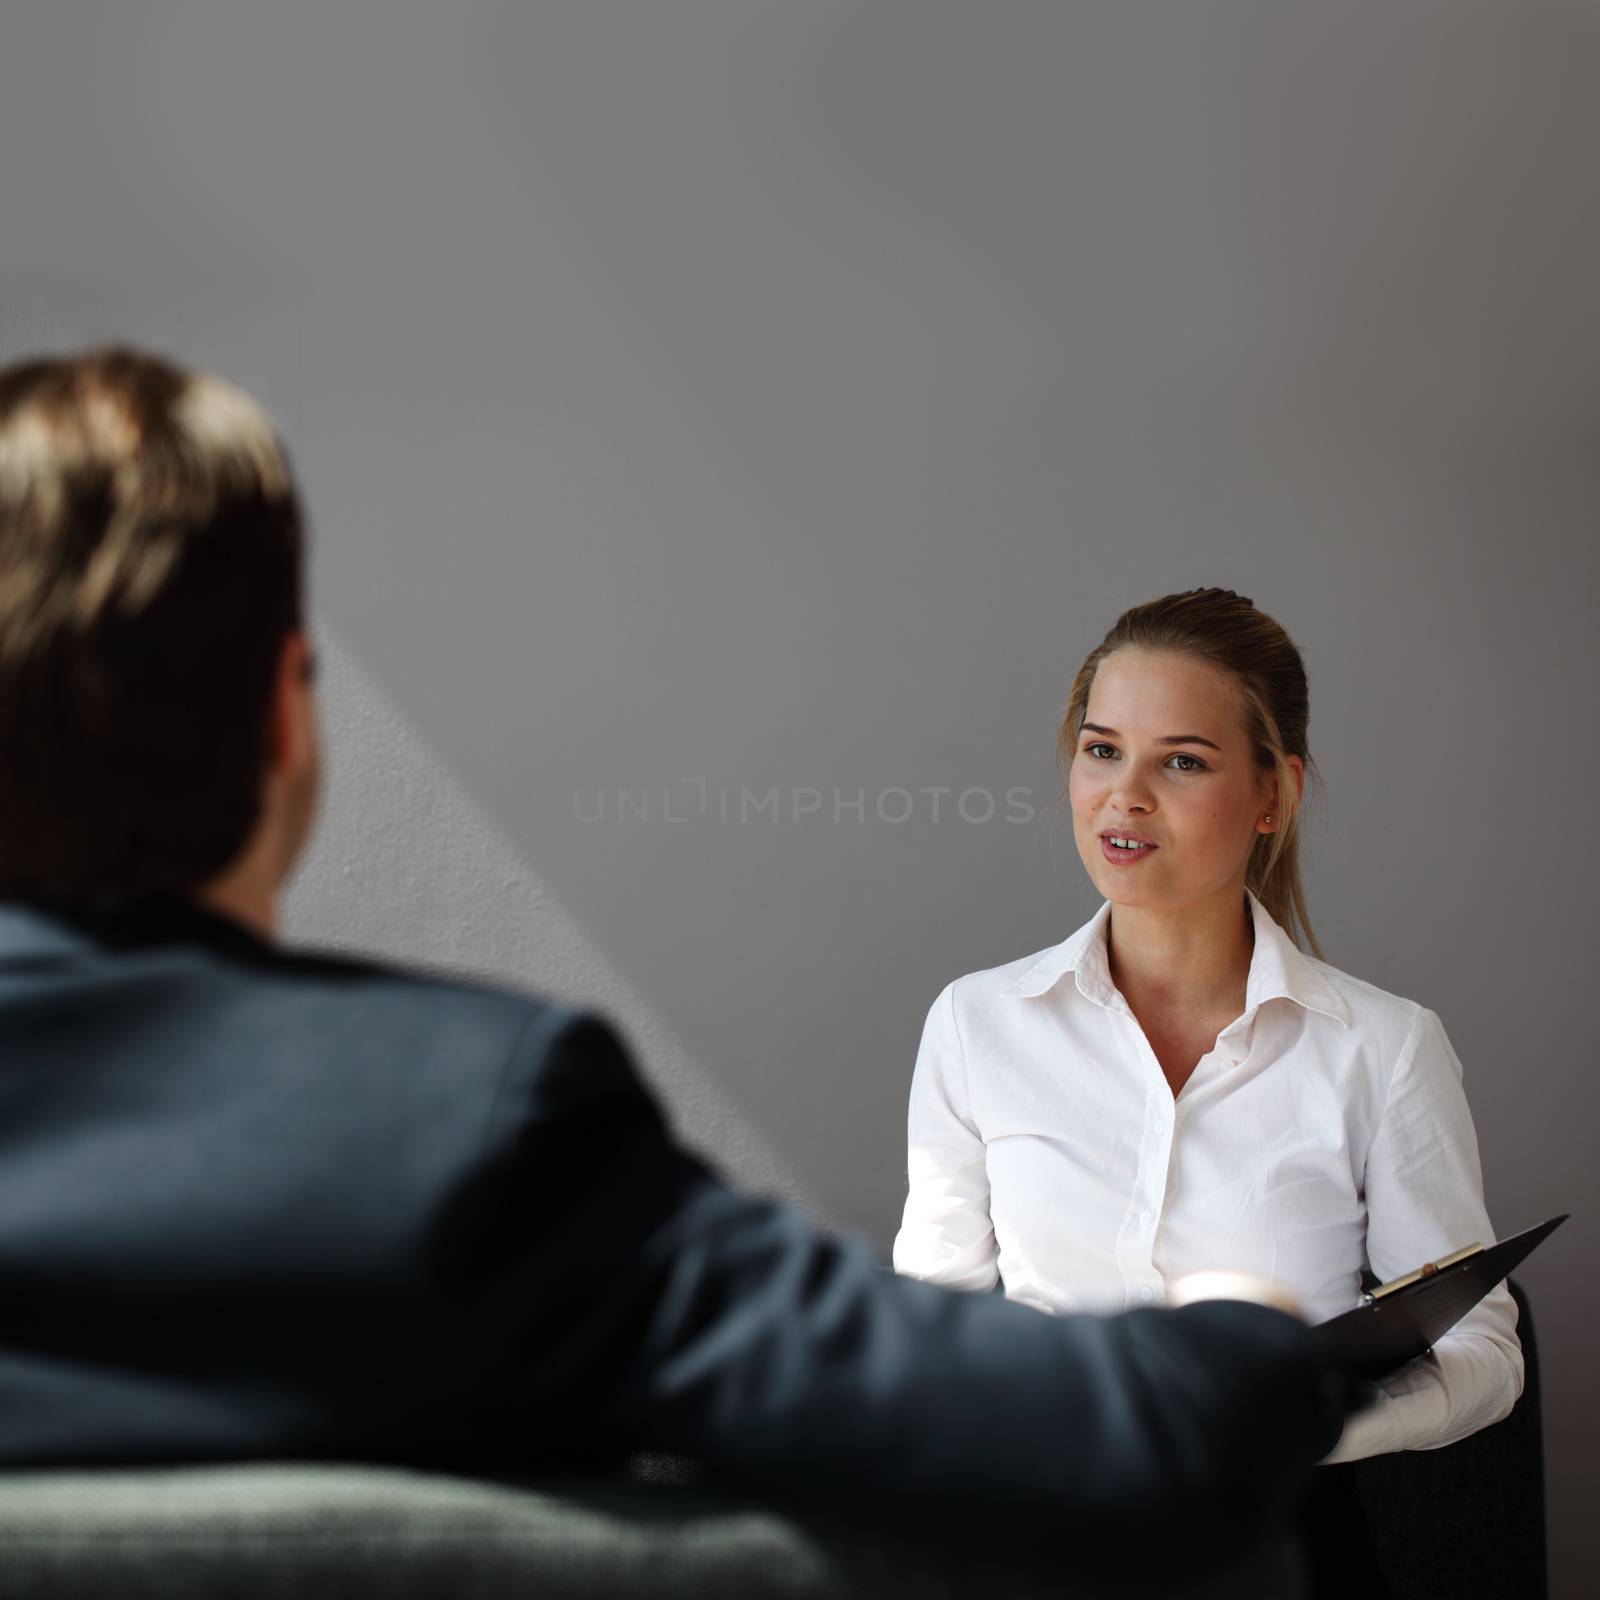 Job business interview by ALotOfPeople